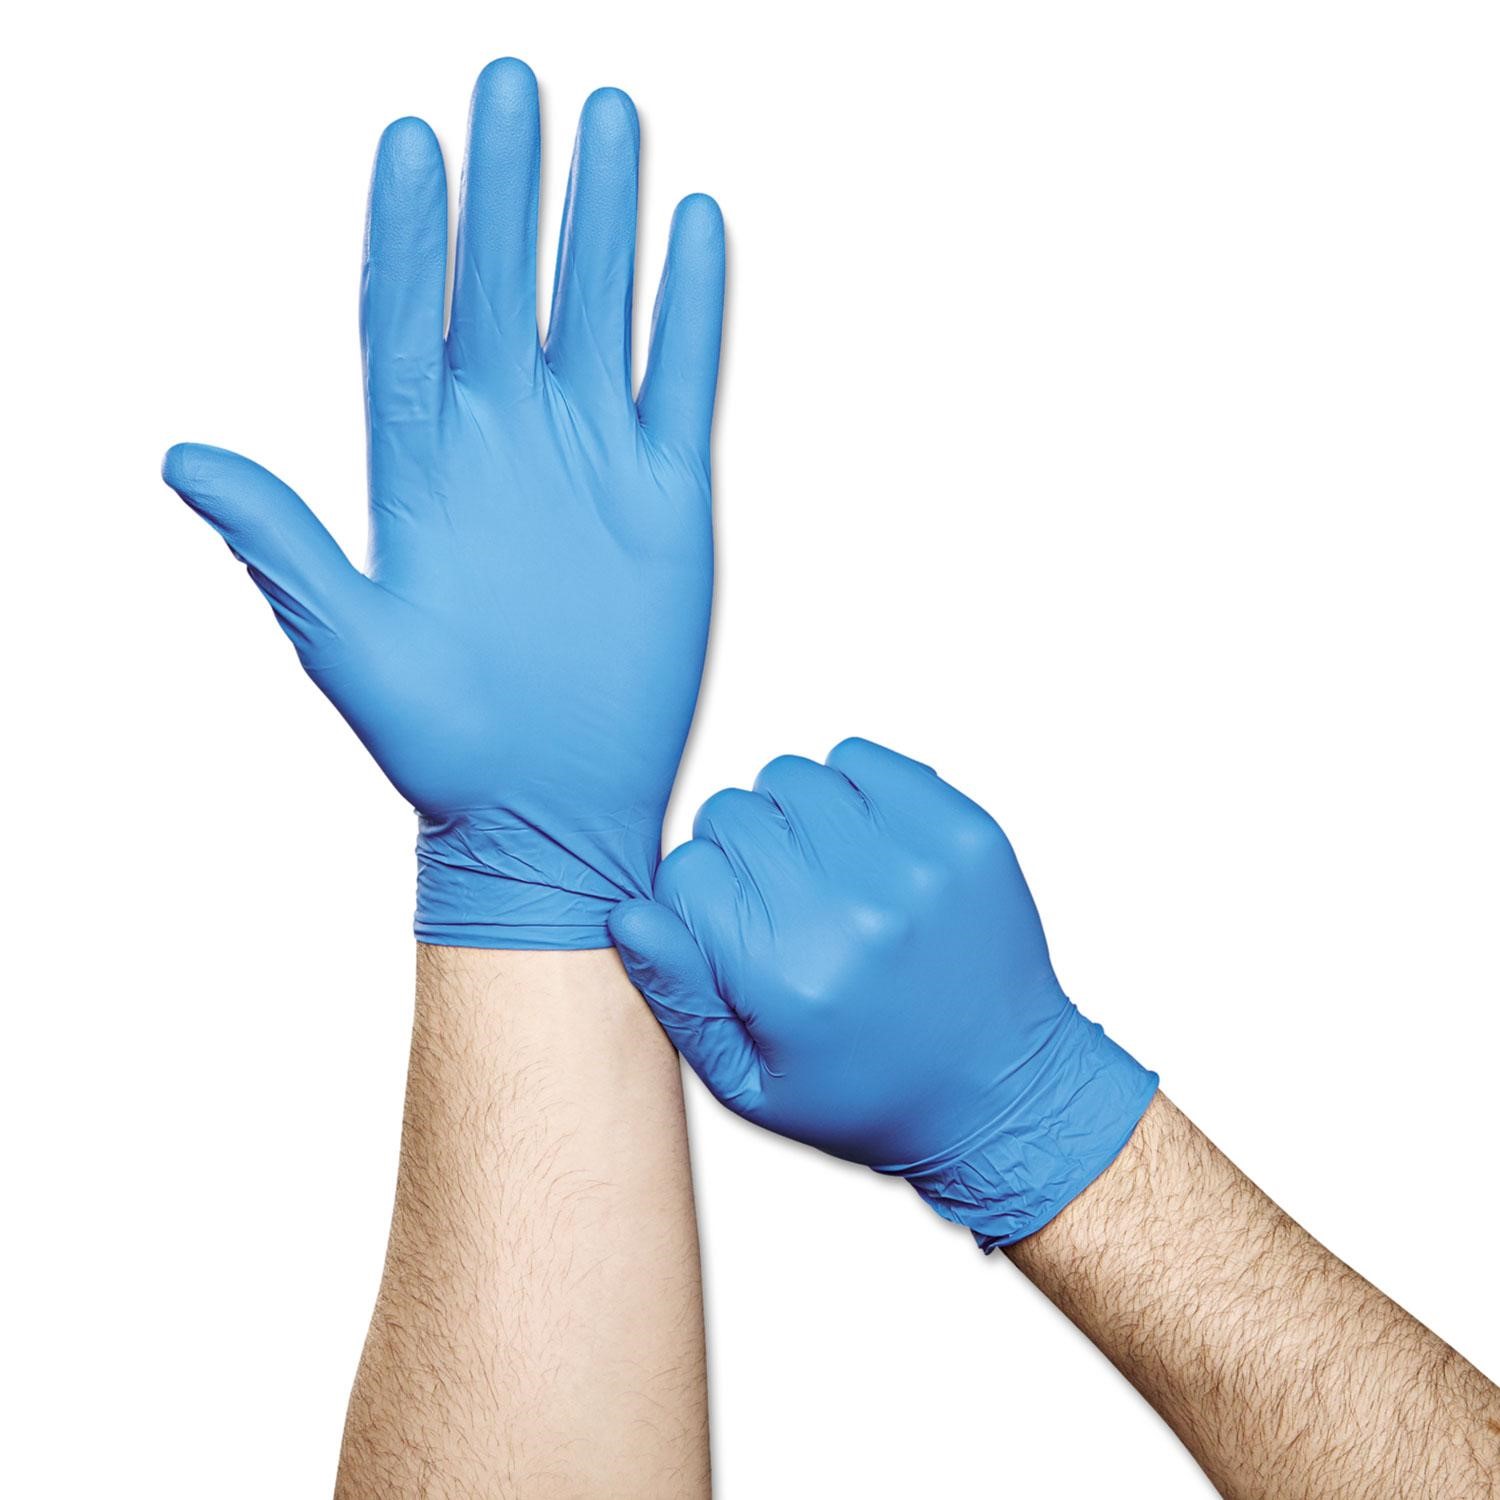 Top 10 Lab Safety Equipment for Your Laboratory